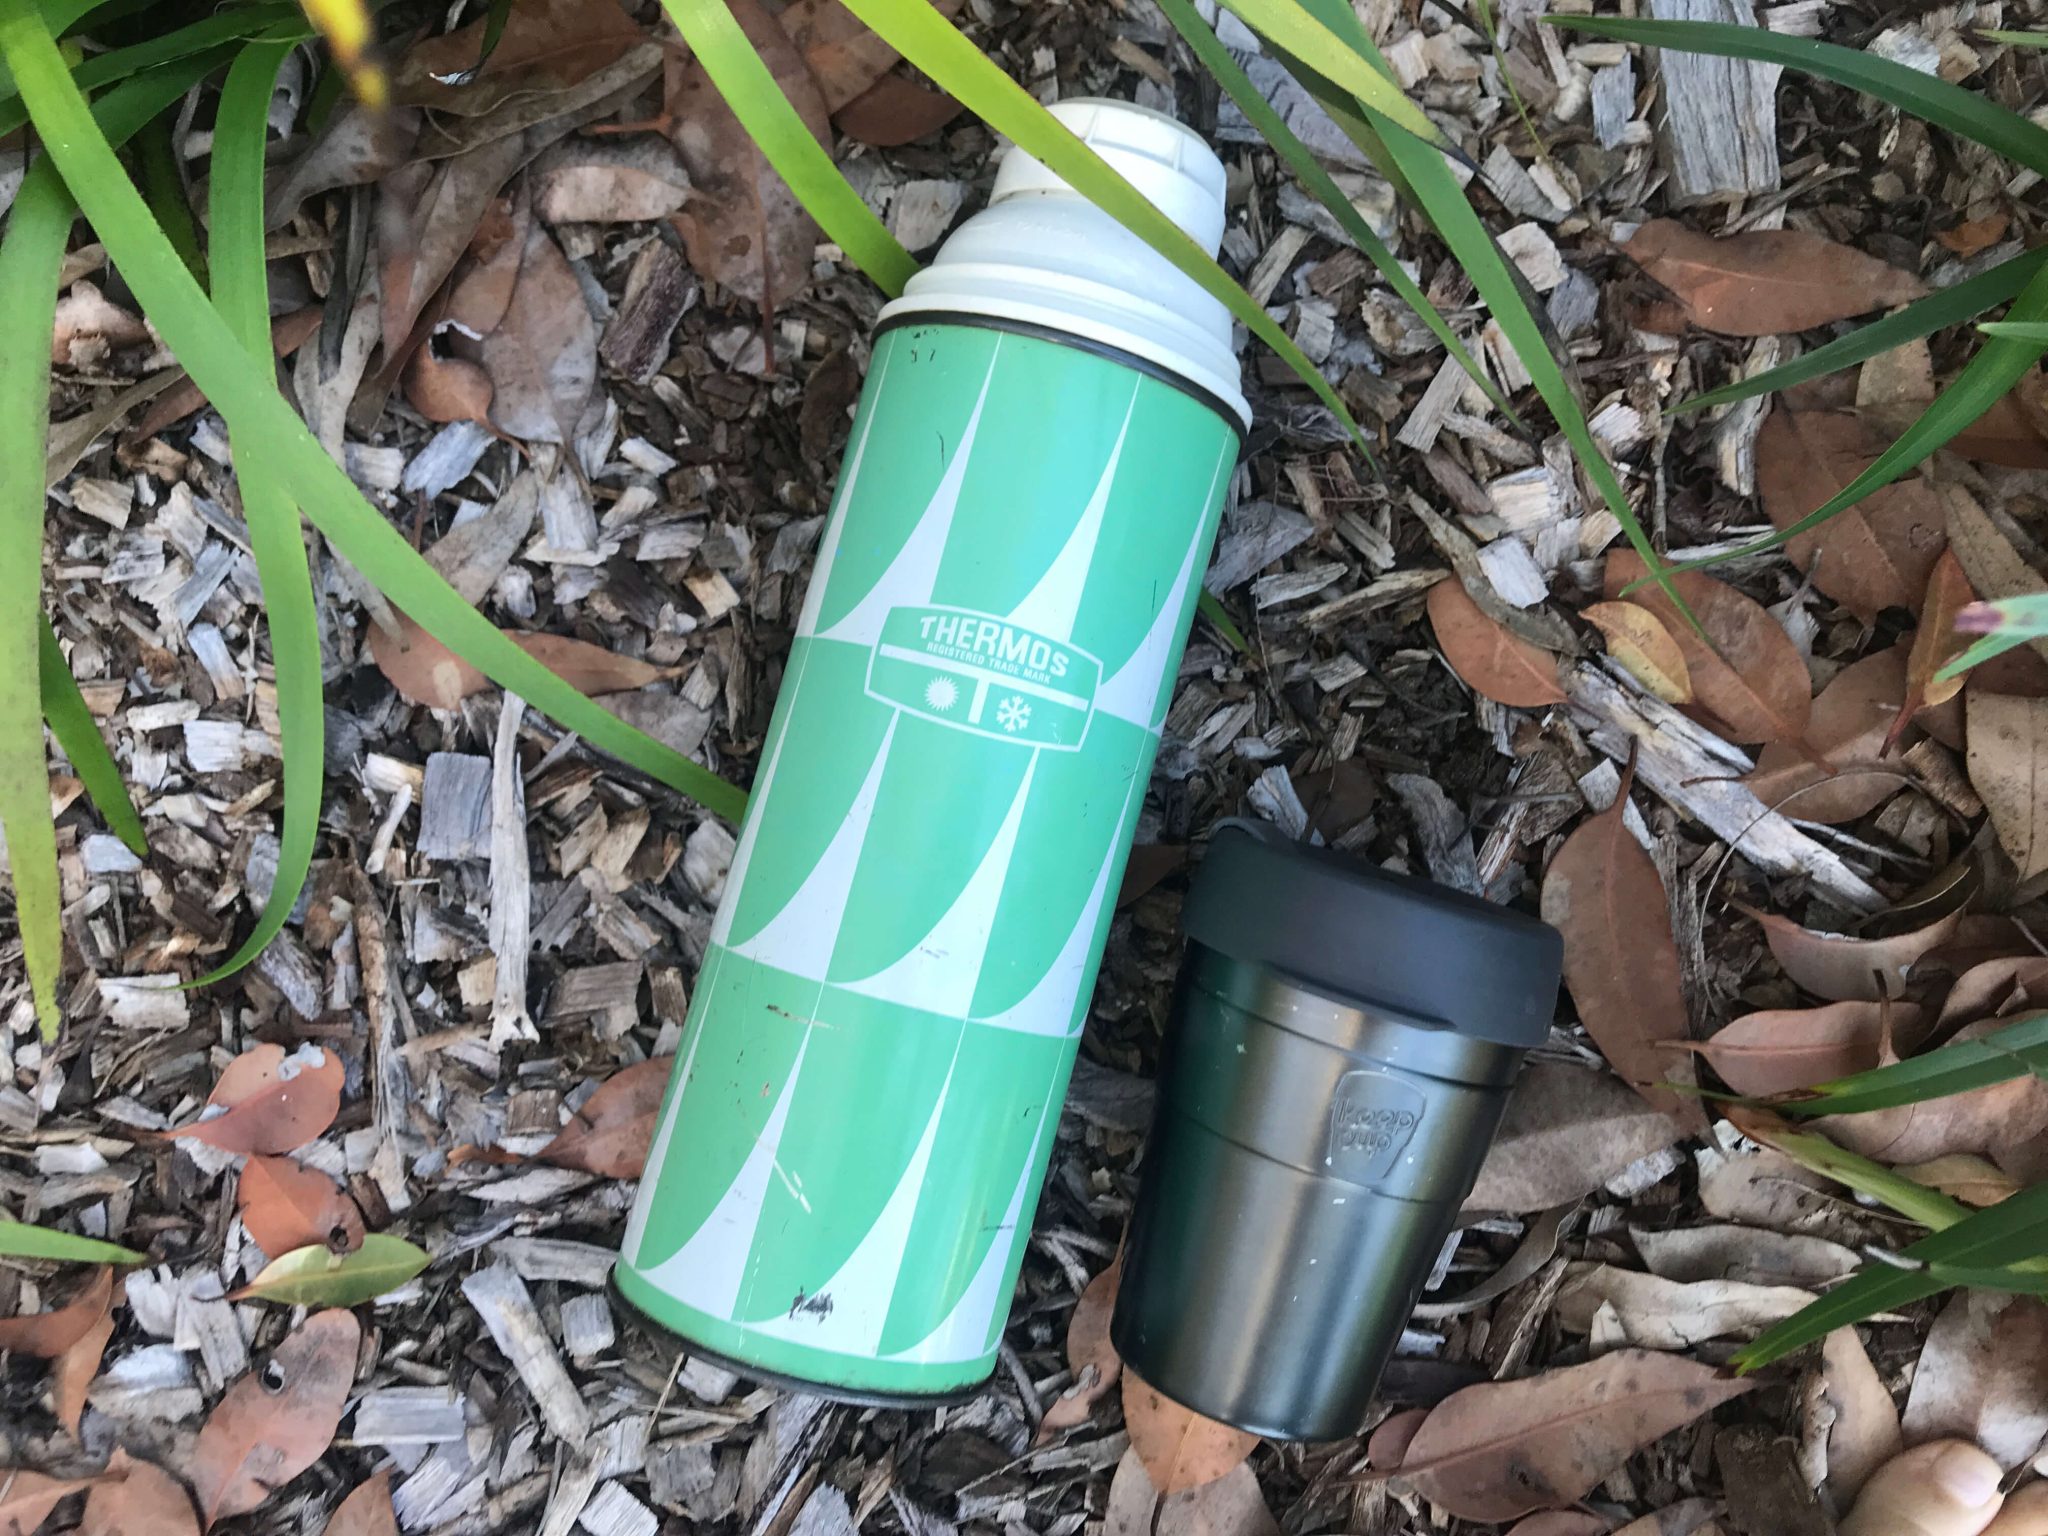 5 Perks for BYO Coffee in a Vintage Thermos